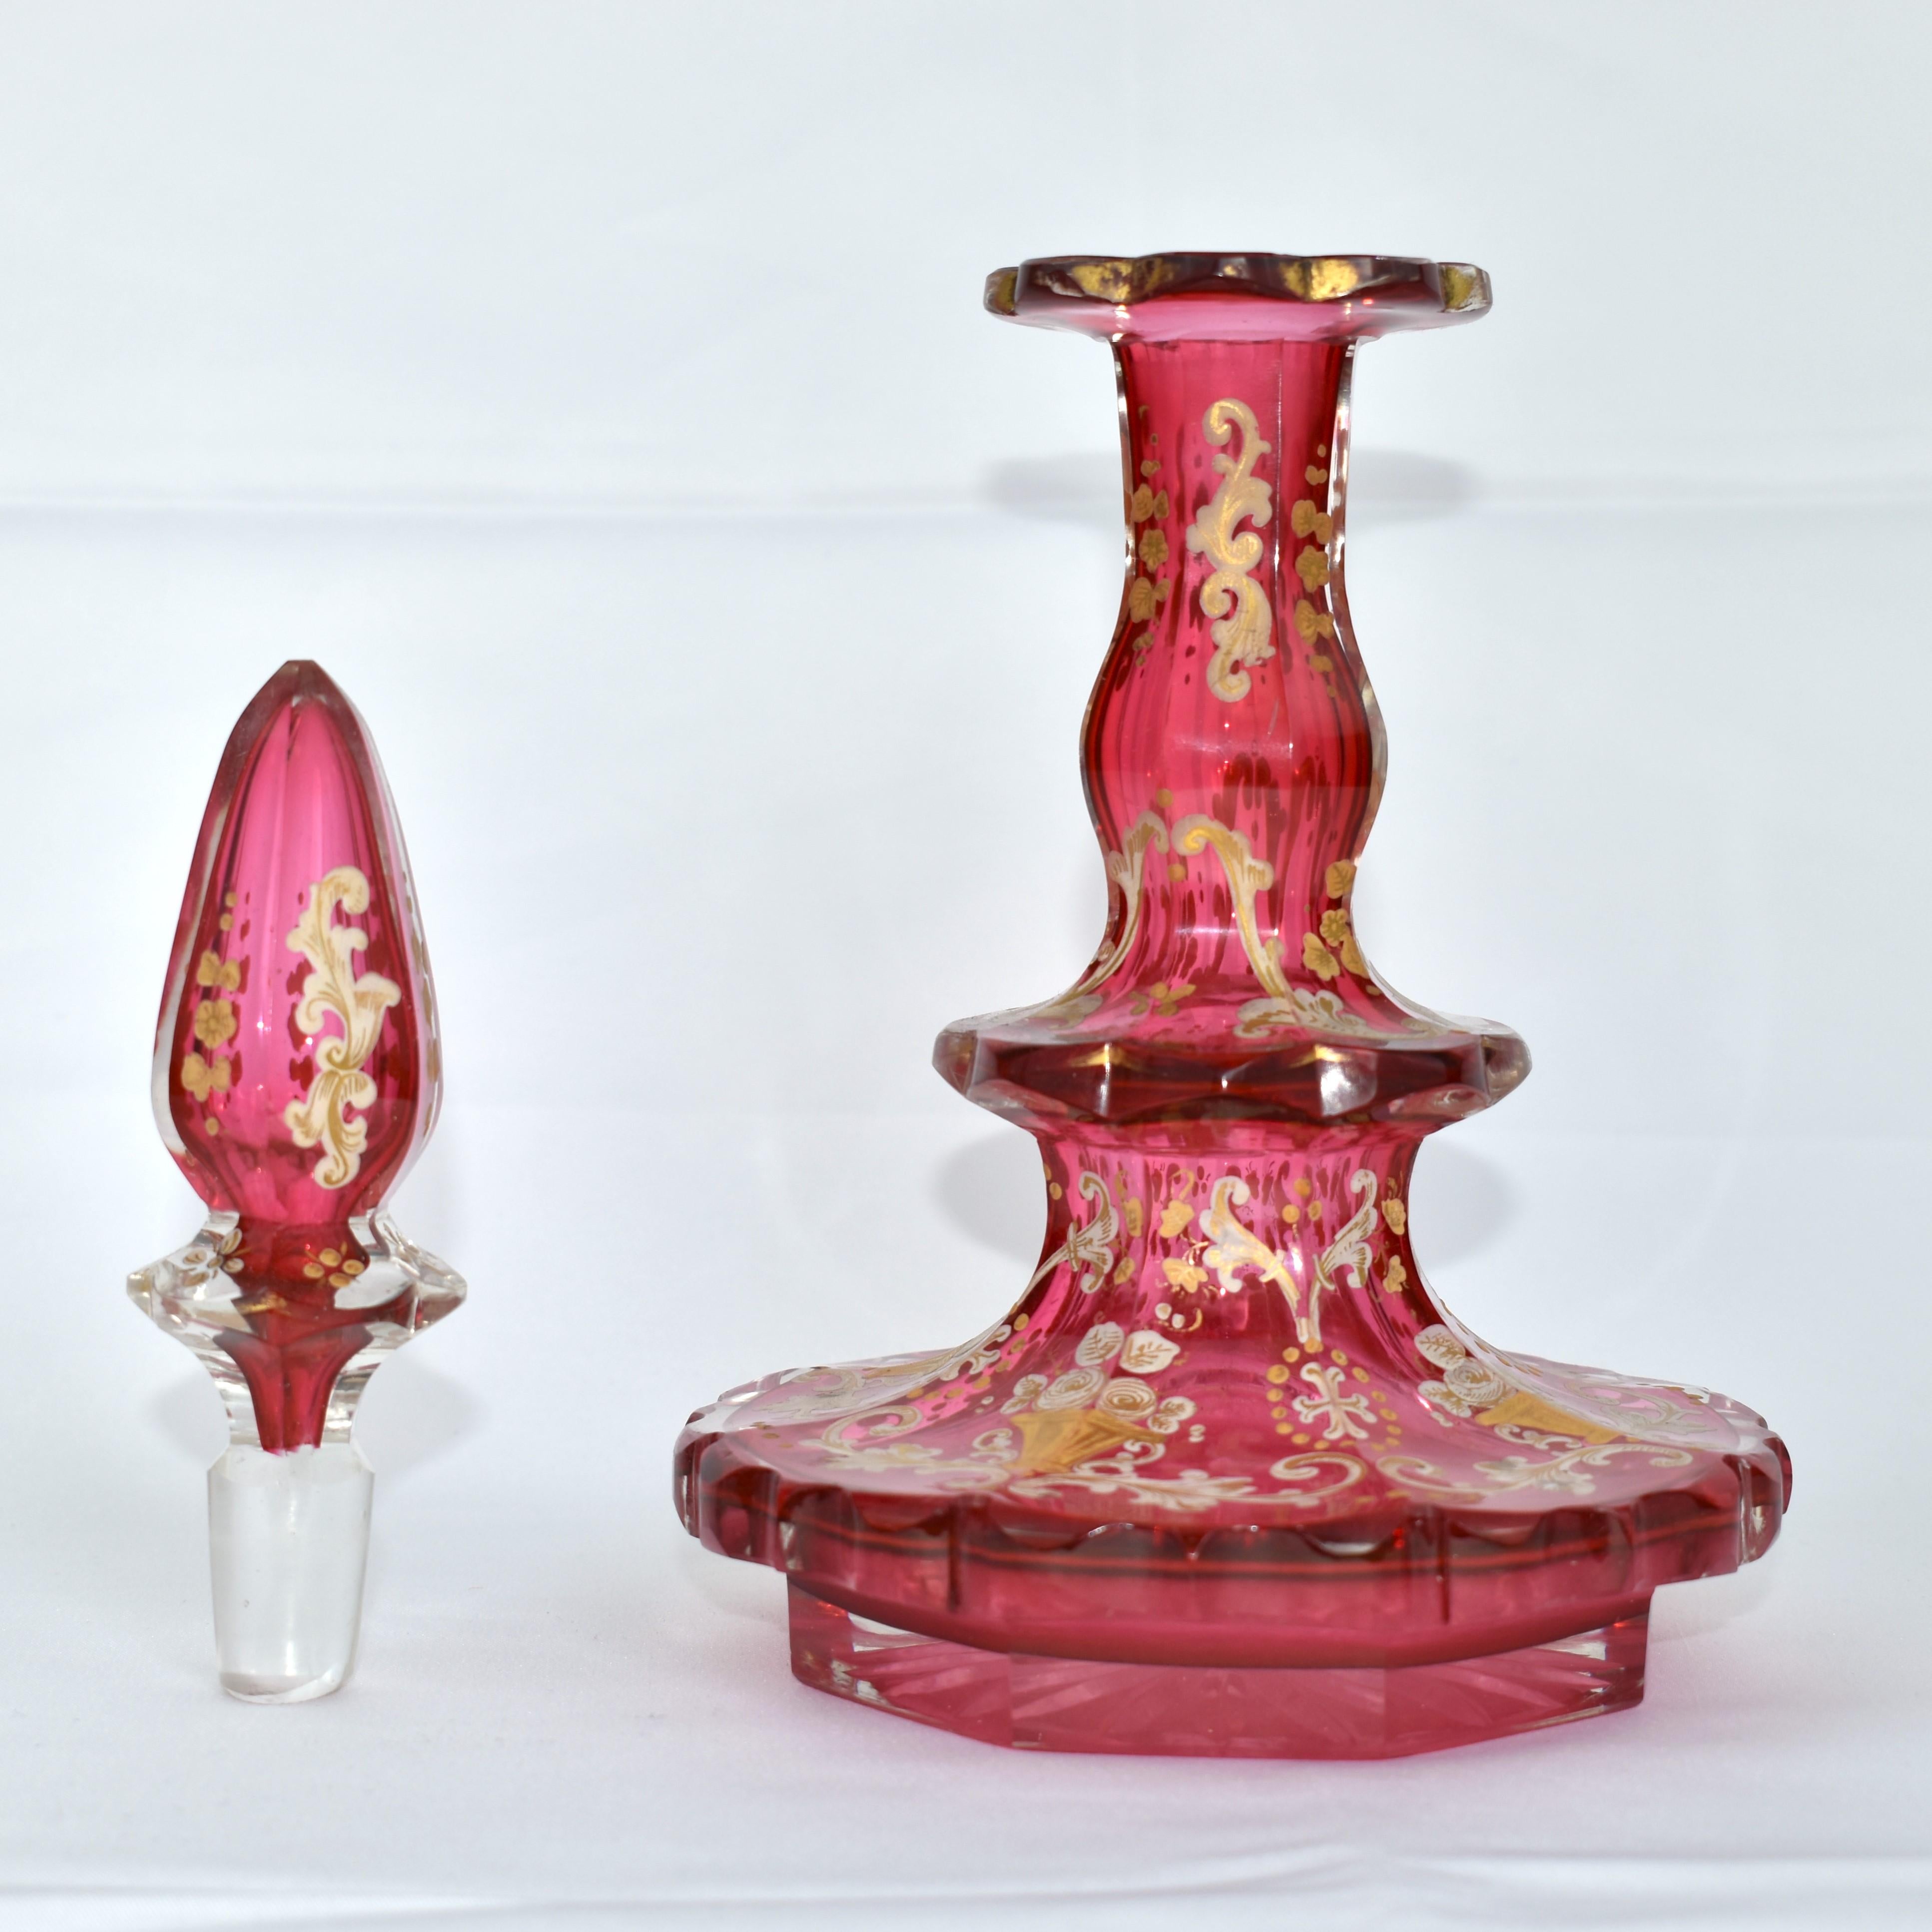 19th Century ANTIQUE PAIR OF BOHEMIAN CRANBERRY GLASS ENAMELLED PERFUME BOTTLES, 19th CENTURY For Sale